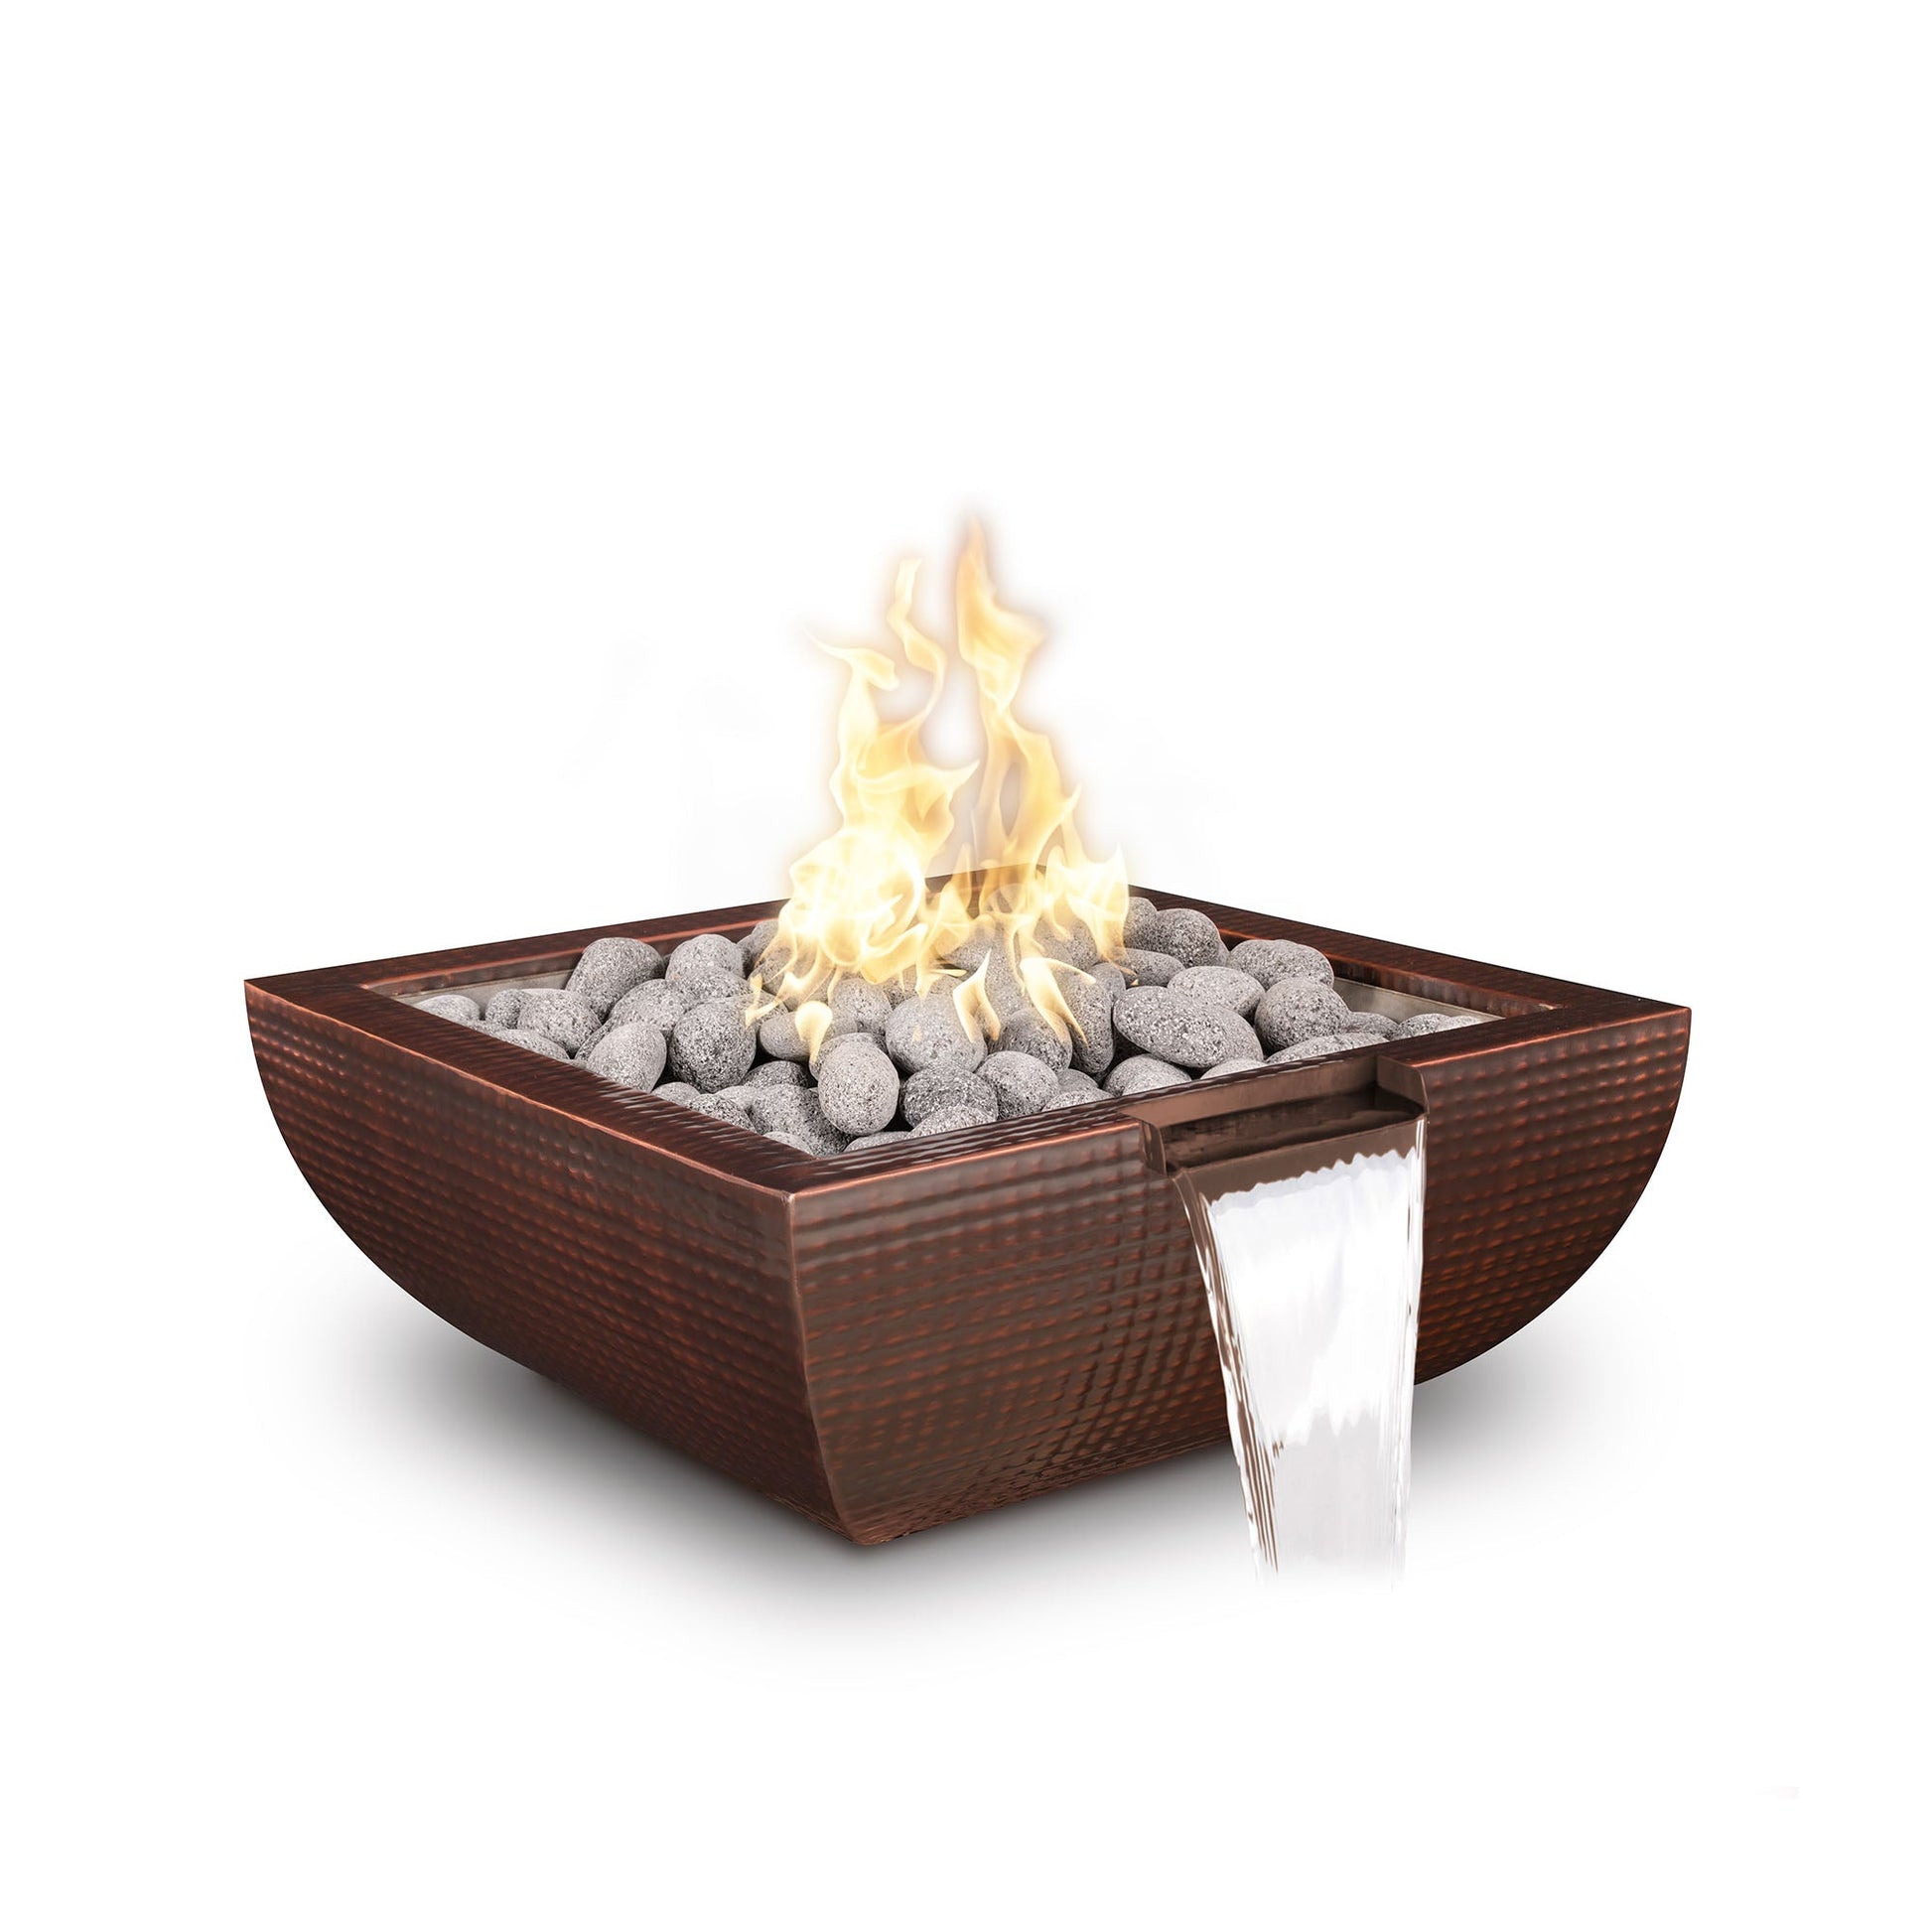 The Outdoor Plus Square Avalon 24" Hammered Copper Natural Gas Fire & Water Bowl with Match Lit with Flame Sense Ignition